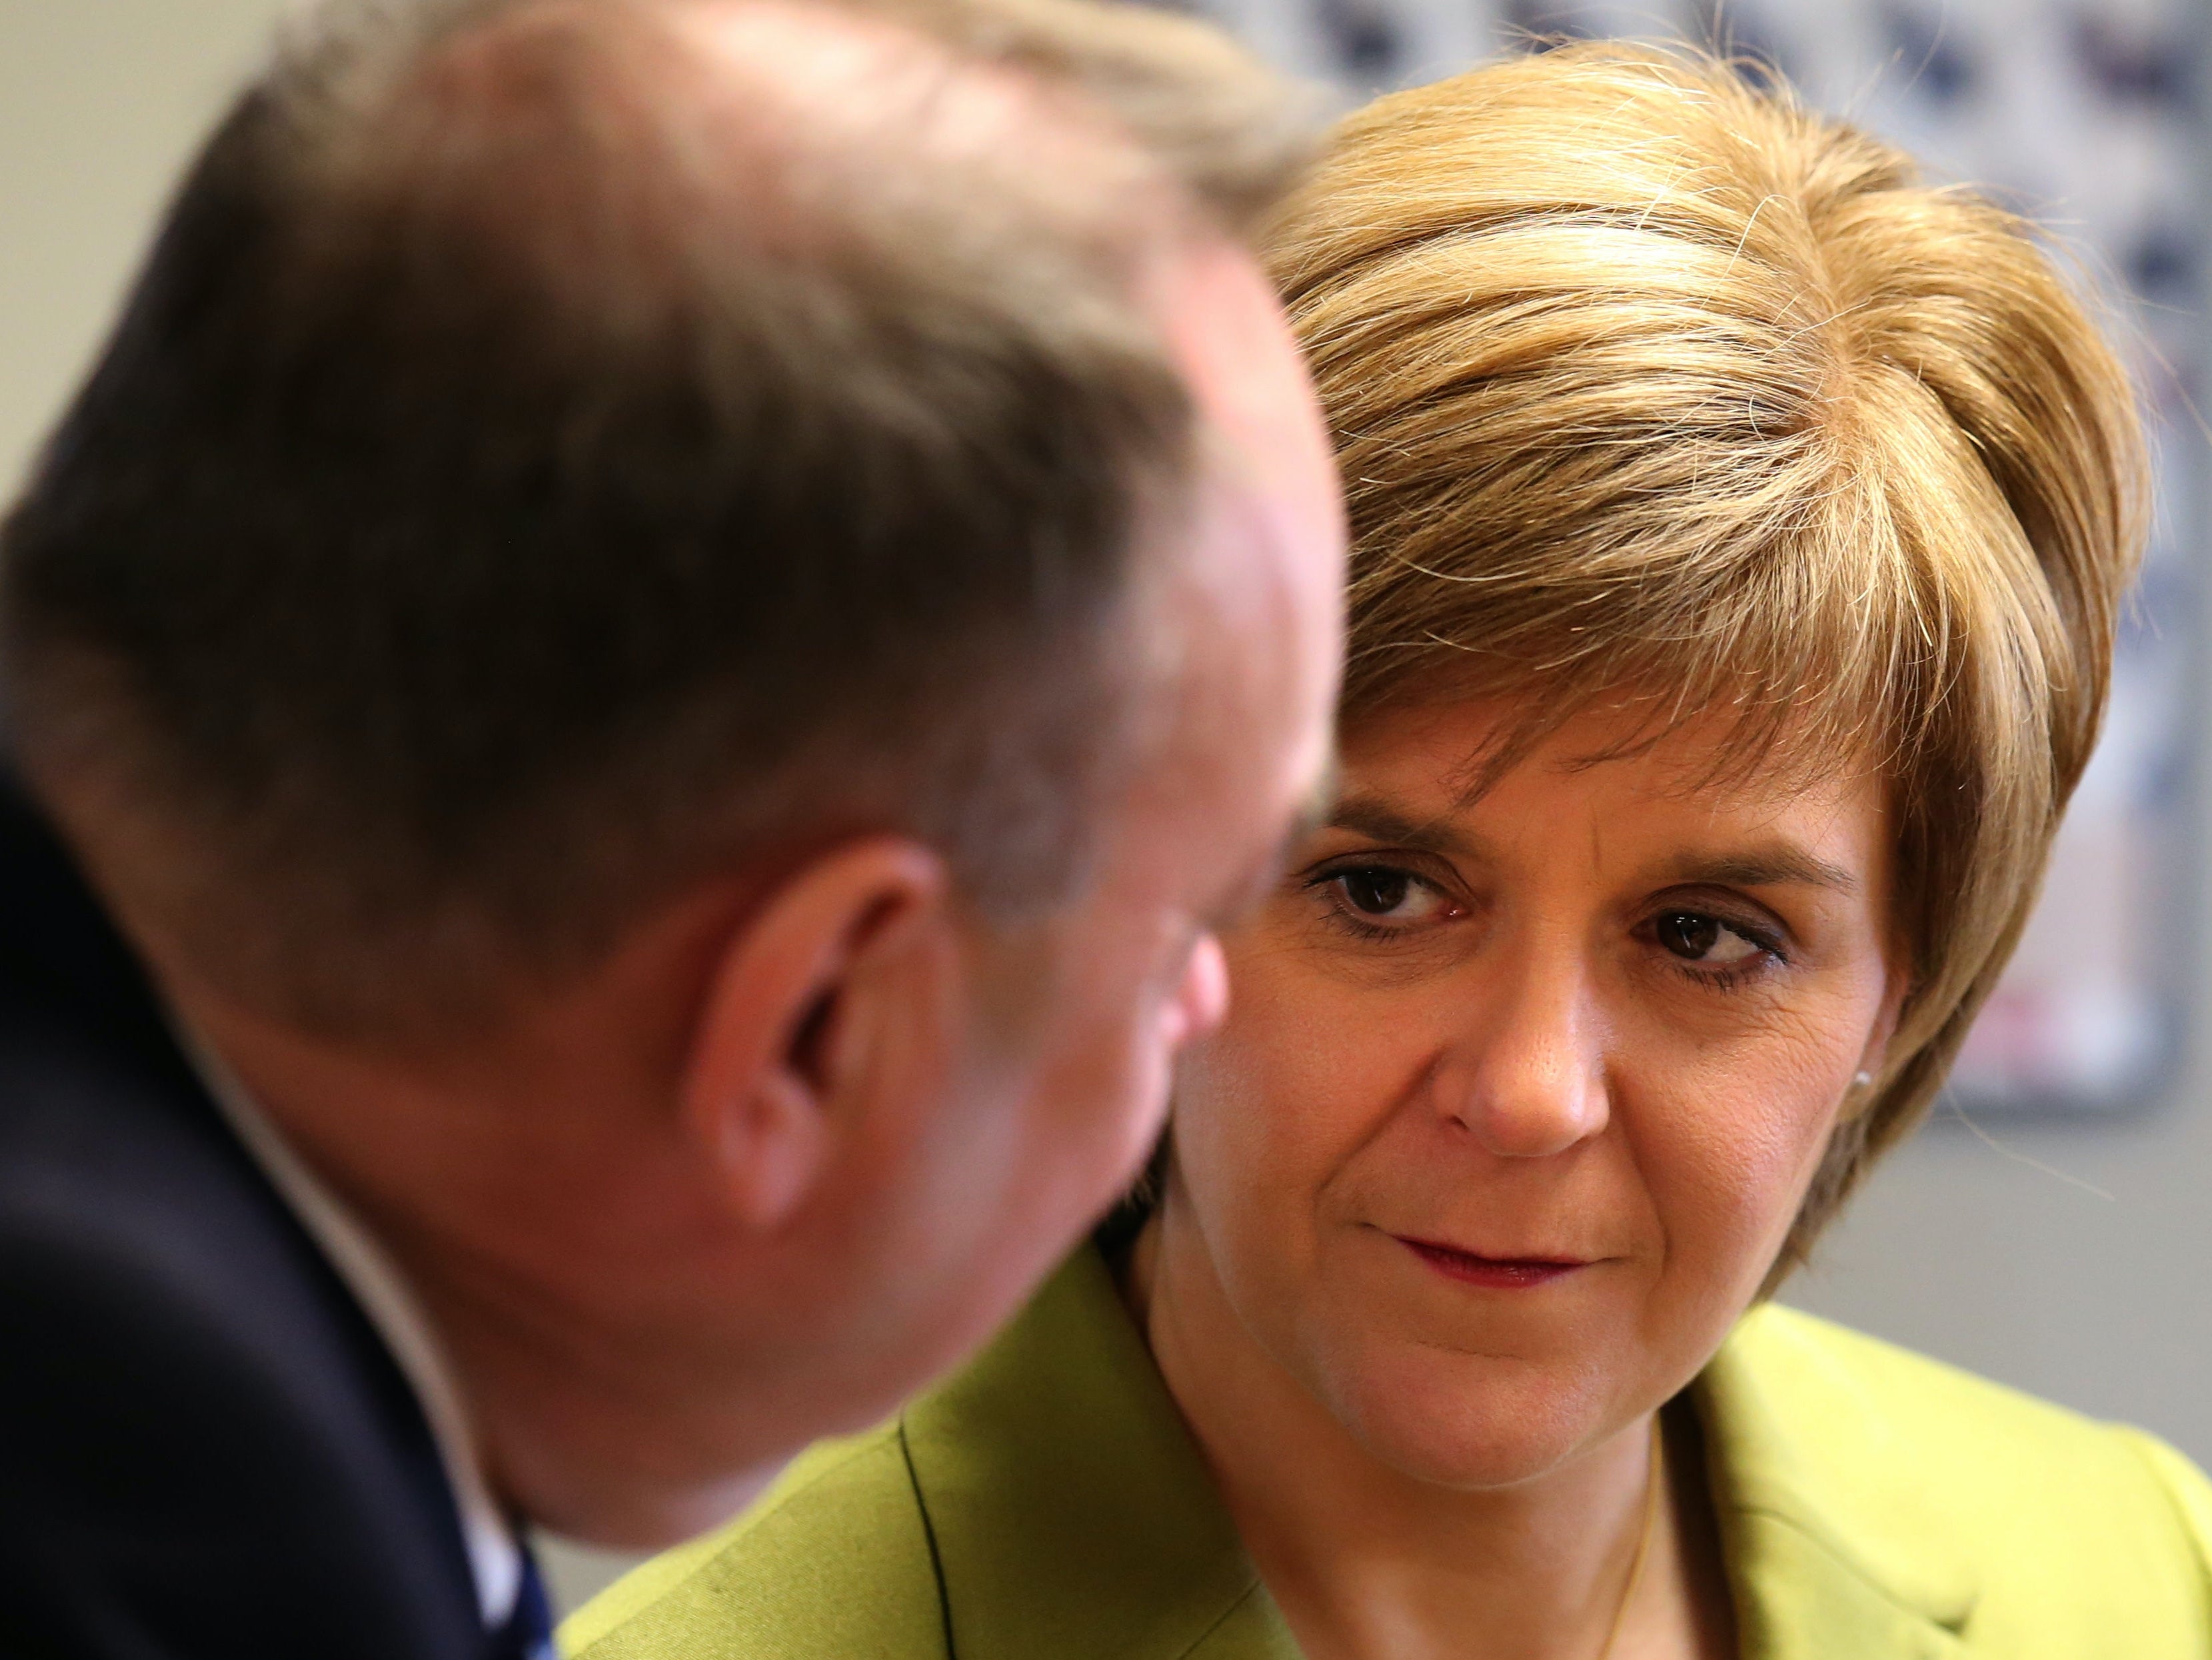 Nicola Sturgeon with Alex Salmond campaigning together in 2015